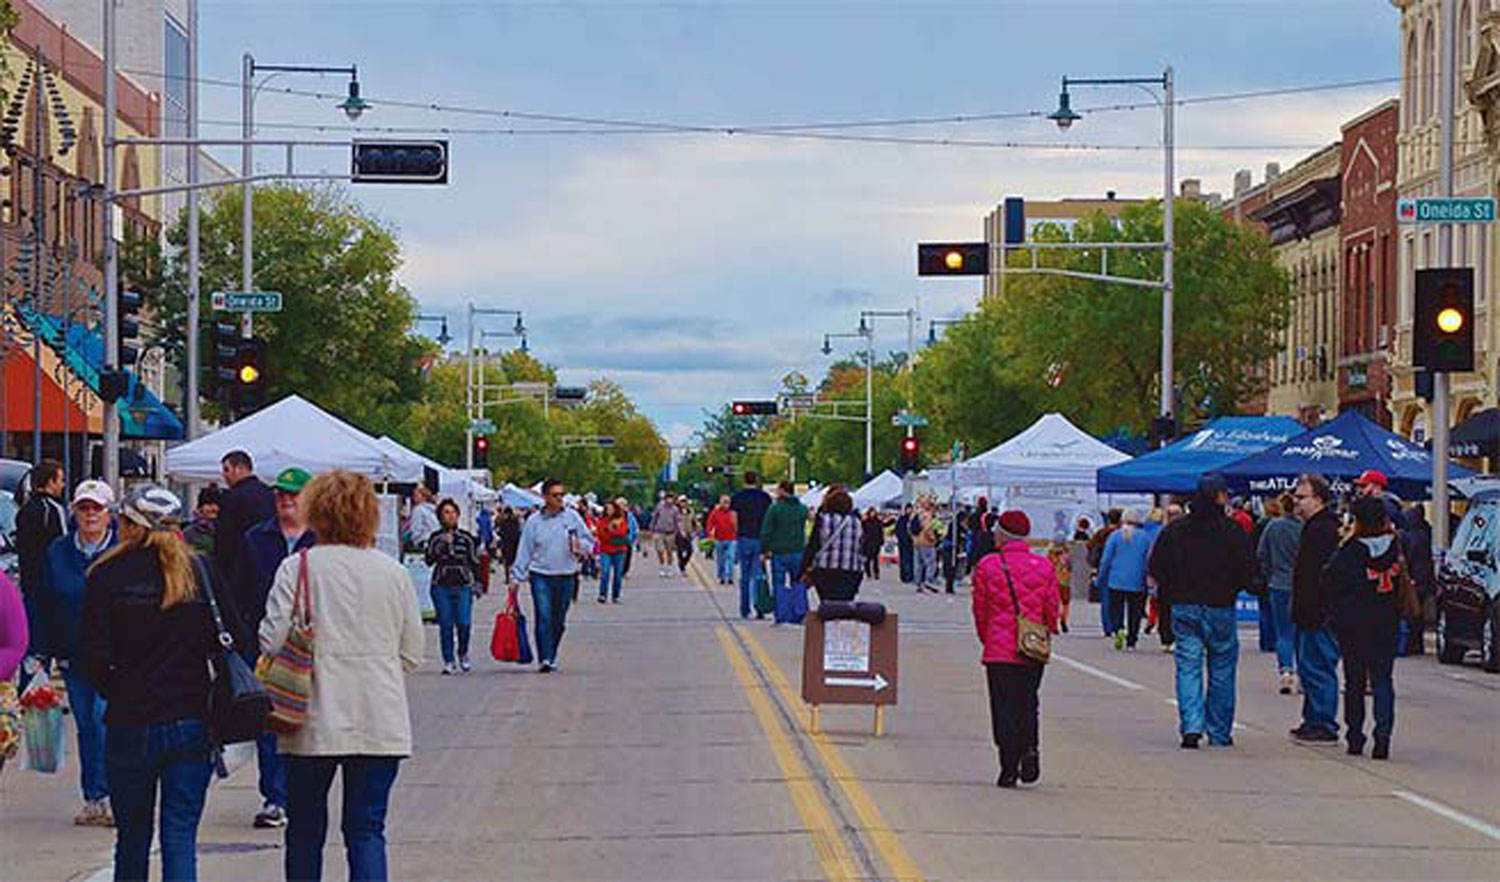 Crowds in Downtown Appleton are certain to swell this summer with the farmers market and the Mile of Music.